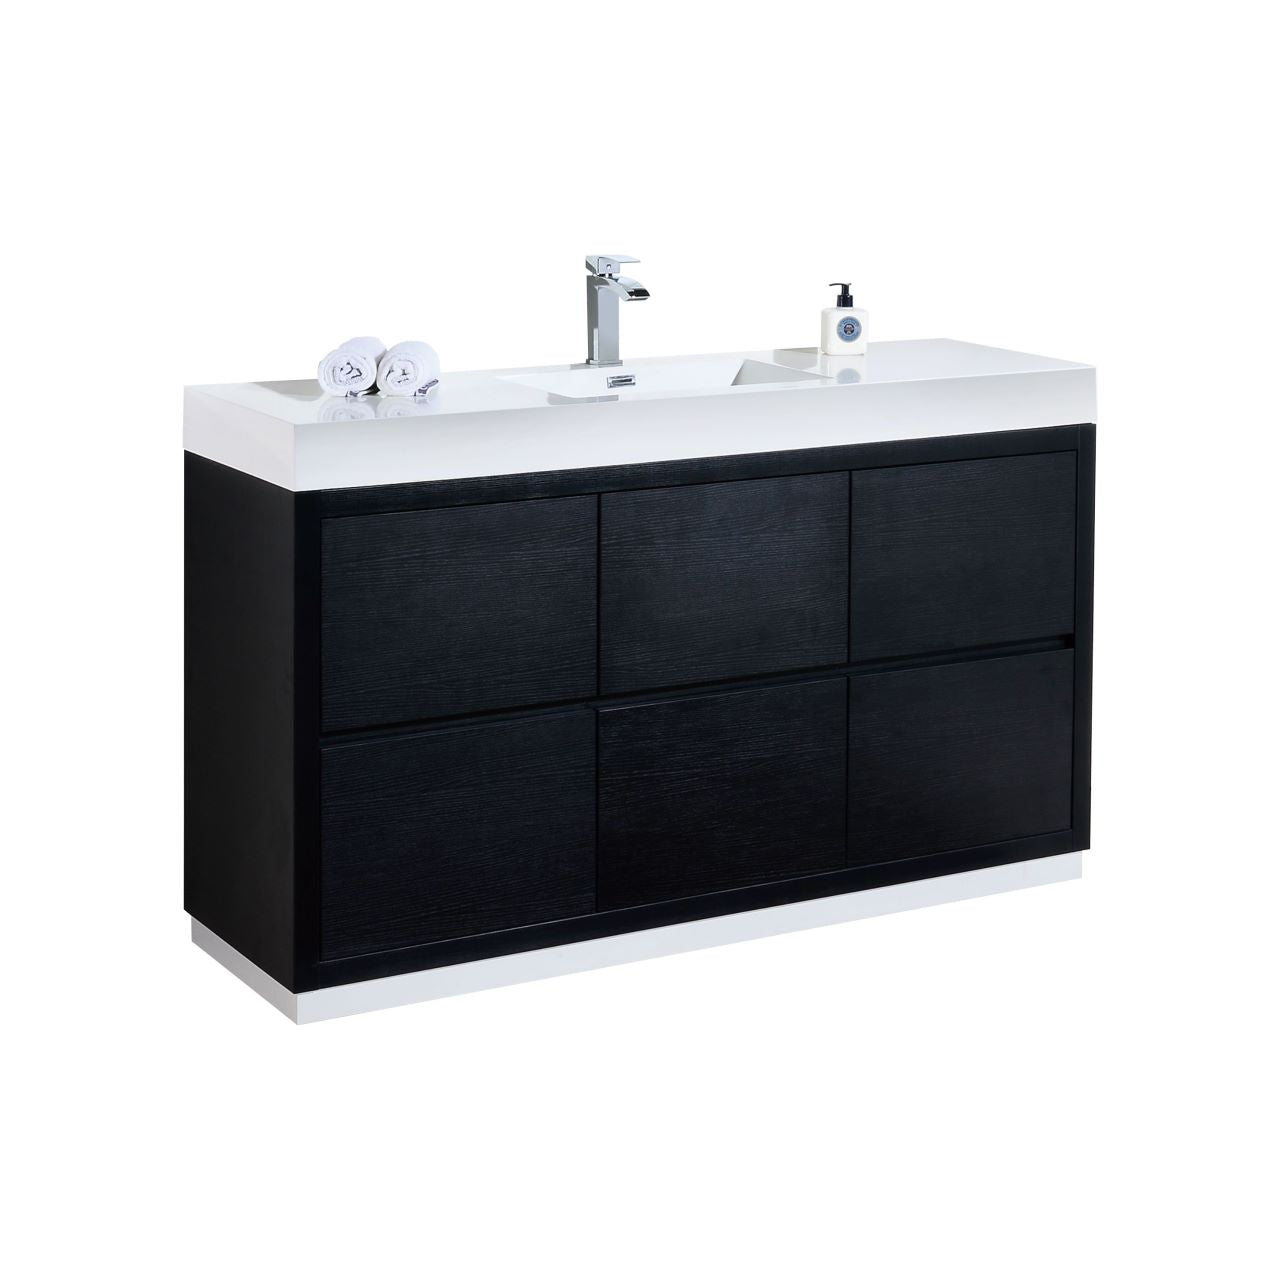 KUBEBATH Bliss FMB60-BK 60" Single Bathroom Vanity in Black with White Acrylic Composite, Integrated Sink, Angled View